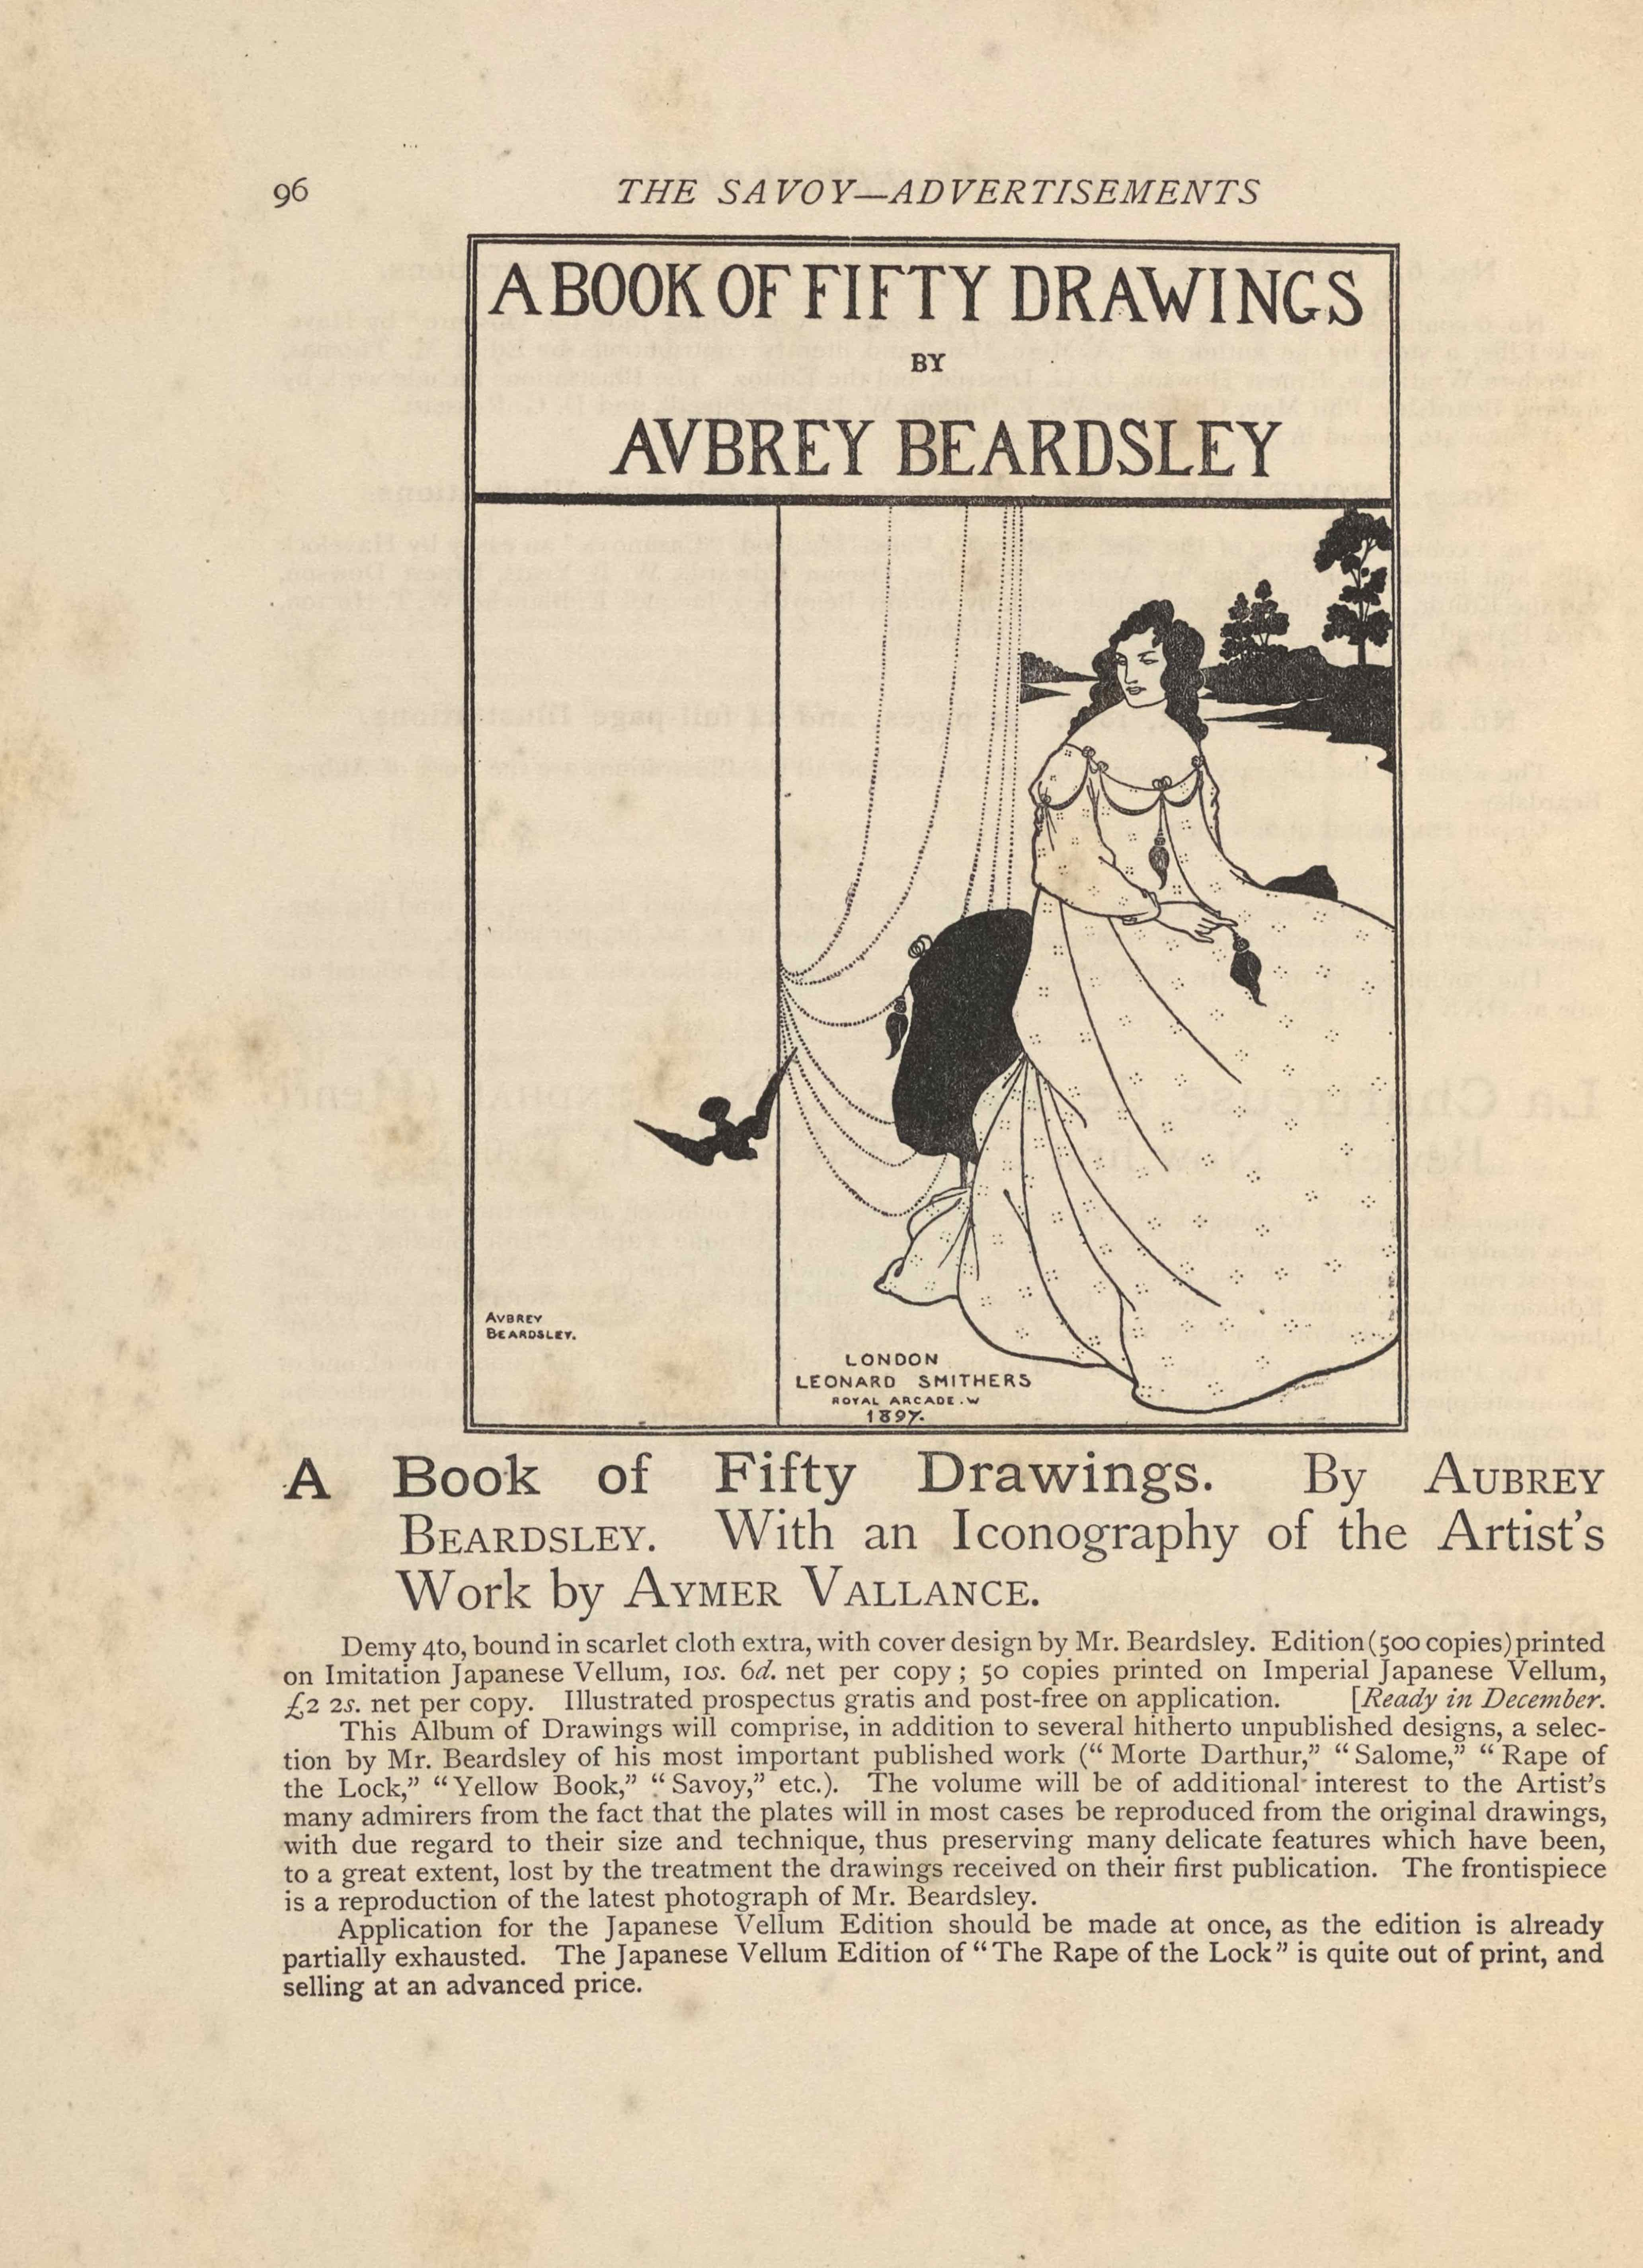 The framed illustration, in portrait orientation, uses a line-block reproduction of Beardsley’s pen-and-ink design. The illustration is an advertisement for a book of 50 drawings by Aubrey Beardsley. The image is divided into three sections. The first section is a banner across the top of three lines of text. The first line reads, “A BOOK OF FIFTY DRAWINGS” [caps]. The next line reads, “BY” [caps] in a smaller font. The third and final line is in the same size font as the first line and reads, “Aubrey Beardsley” [caps]. The second section of the image is demarcated vertically. It takes up the left third of the page. It is blank save for the black silhouette of a bird (possibly a swallow) in descending flight. The edge of the bird’s wing crosses over into the third and final section of the image which takes up the rightmost two thirds of the illustration. This section features a dark haired woman in a white dress sitting on a black chair. Her body is facing the right side of the page but her head is turned to the left. White curtains fall behind her to the left. Behind her on the right is a landscape with a river, the far bank of which is black with the silhouettes of three trees visible.